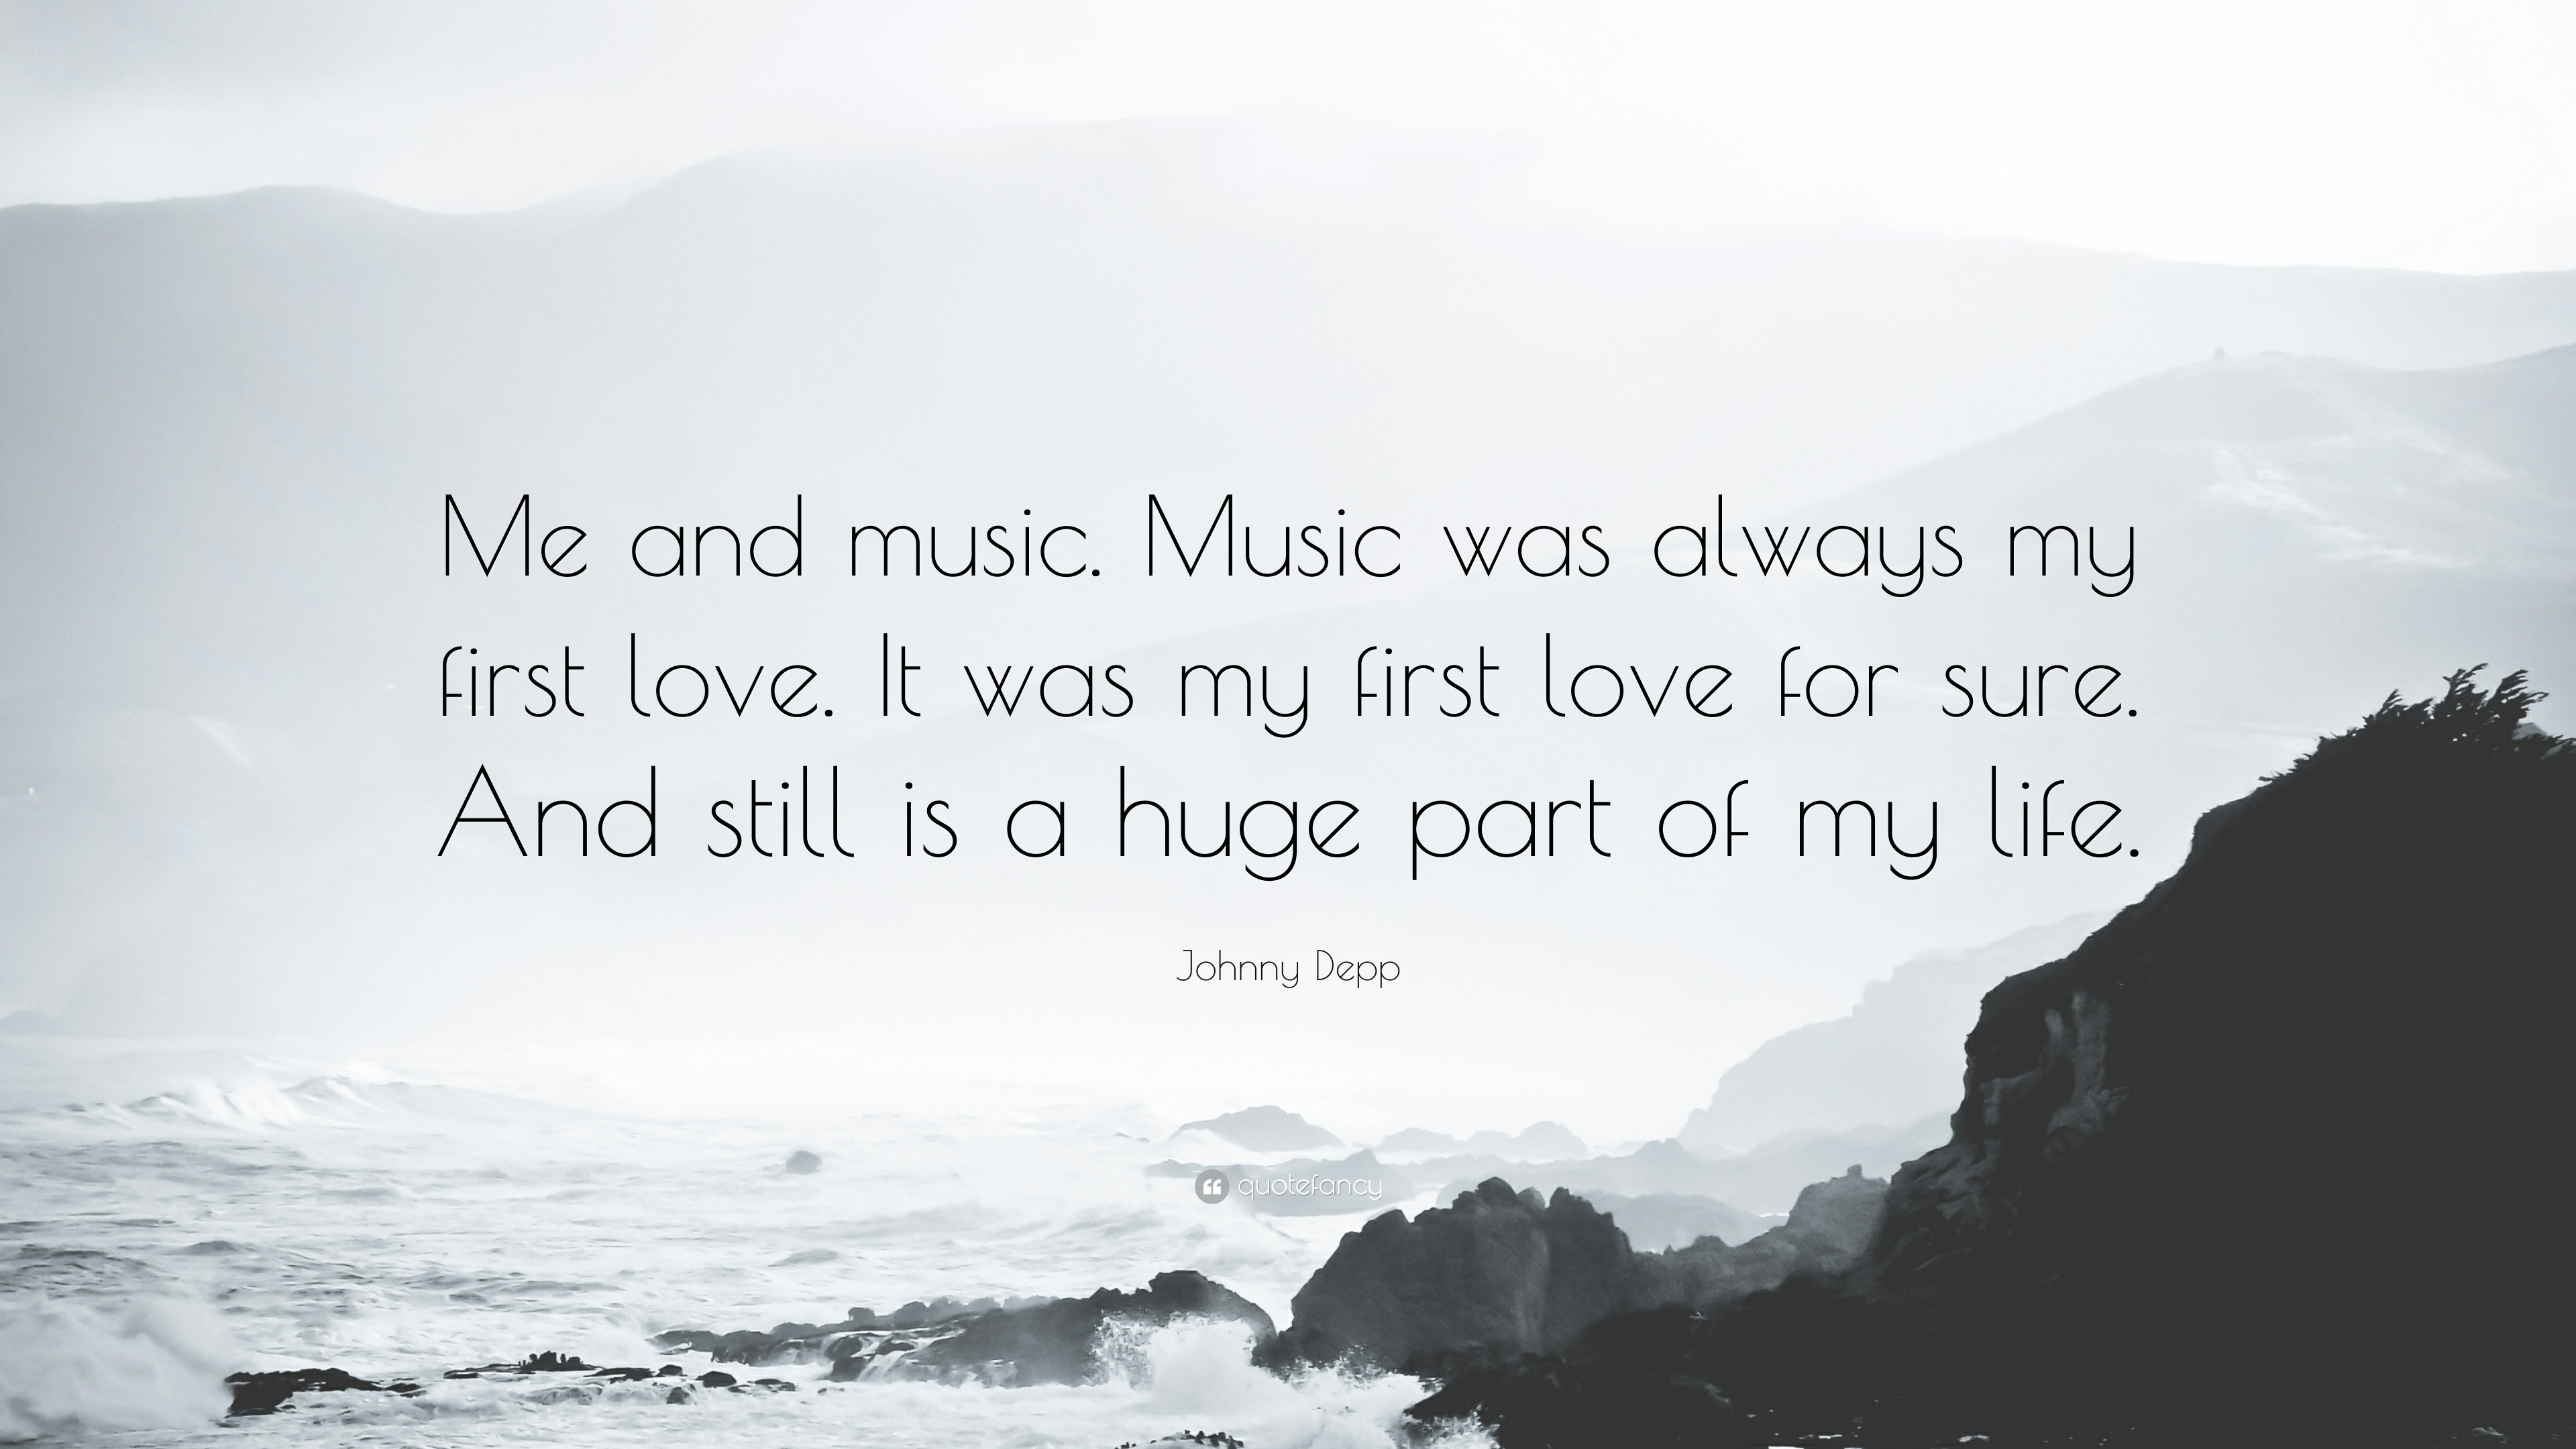 Johnny Depp Quote: “Me and music. Music was always my first love. It was my  first